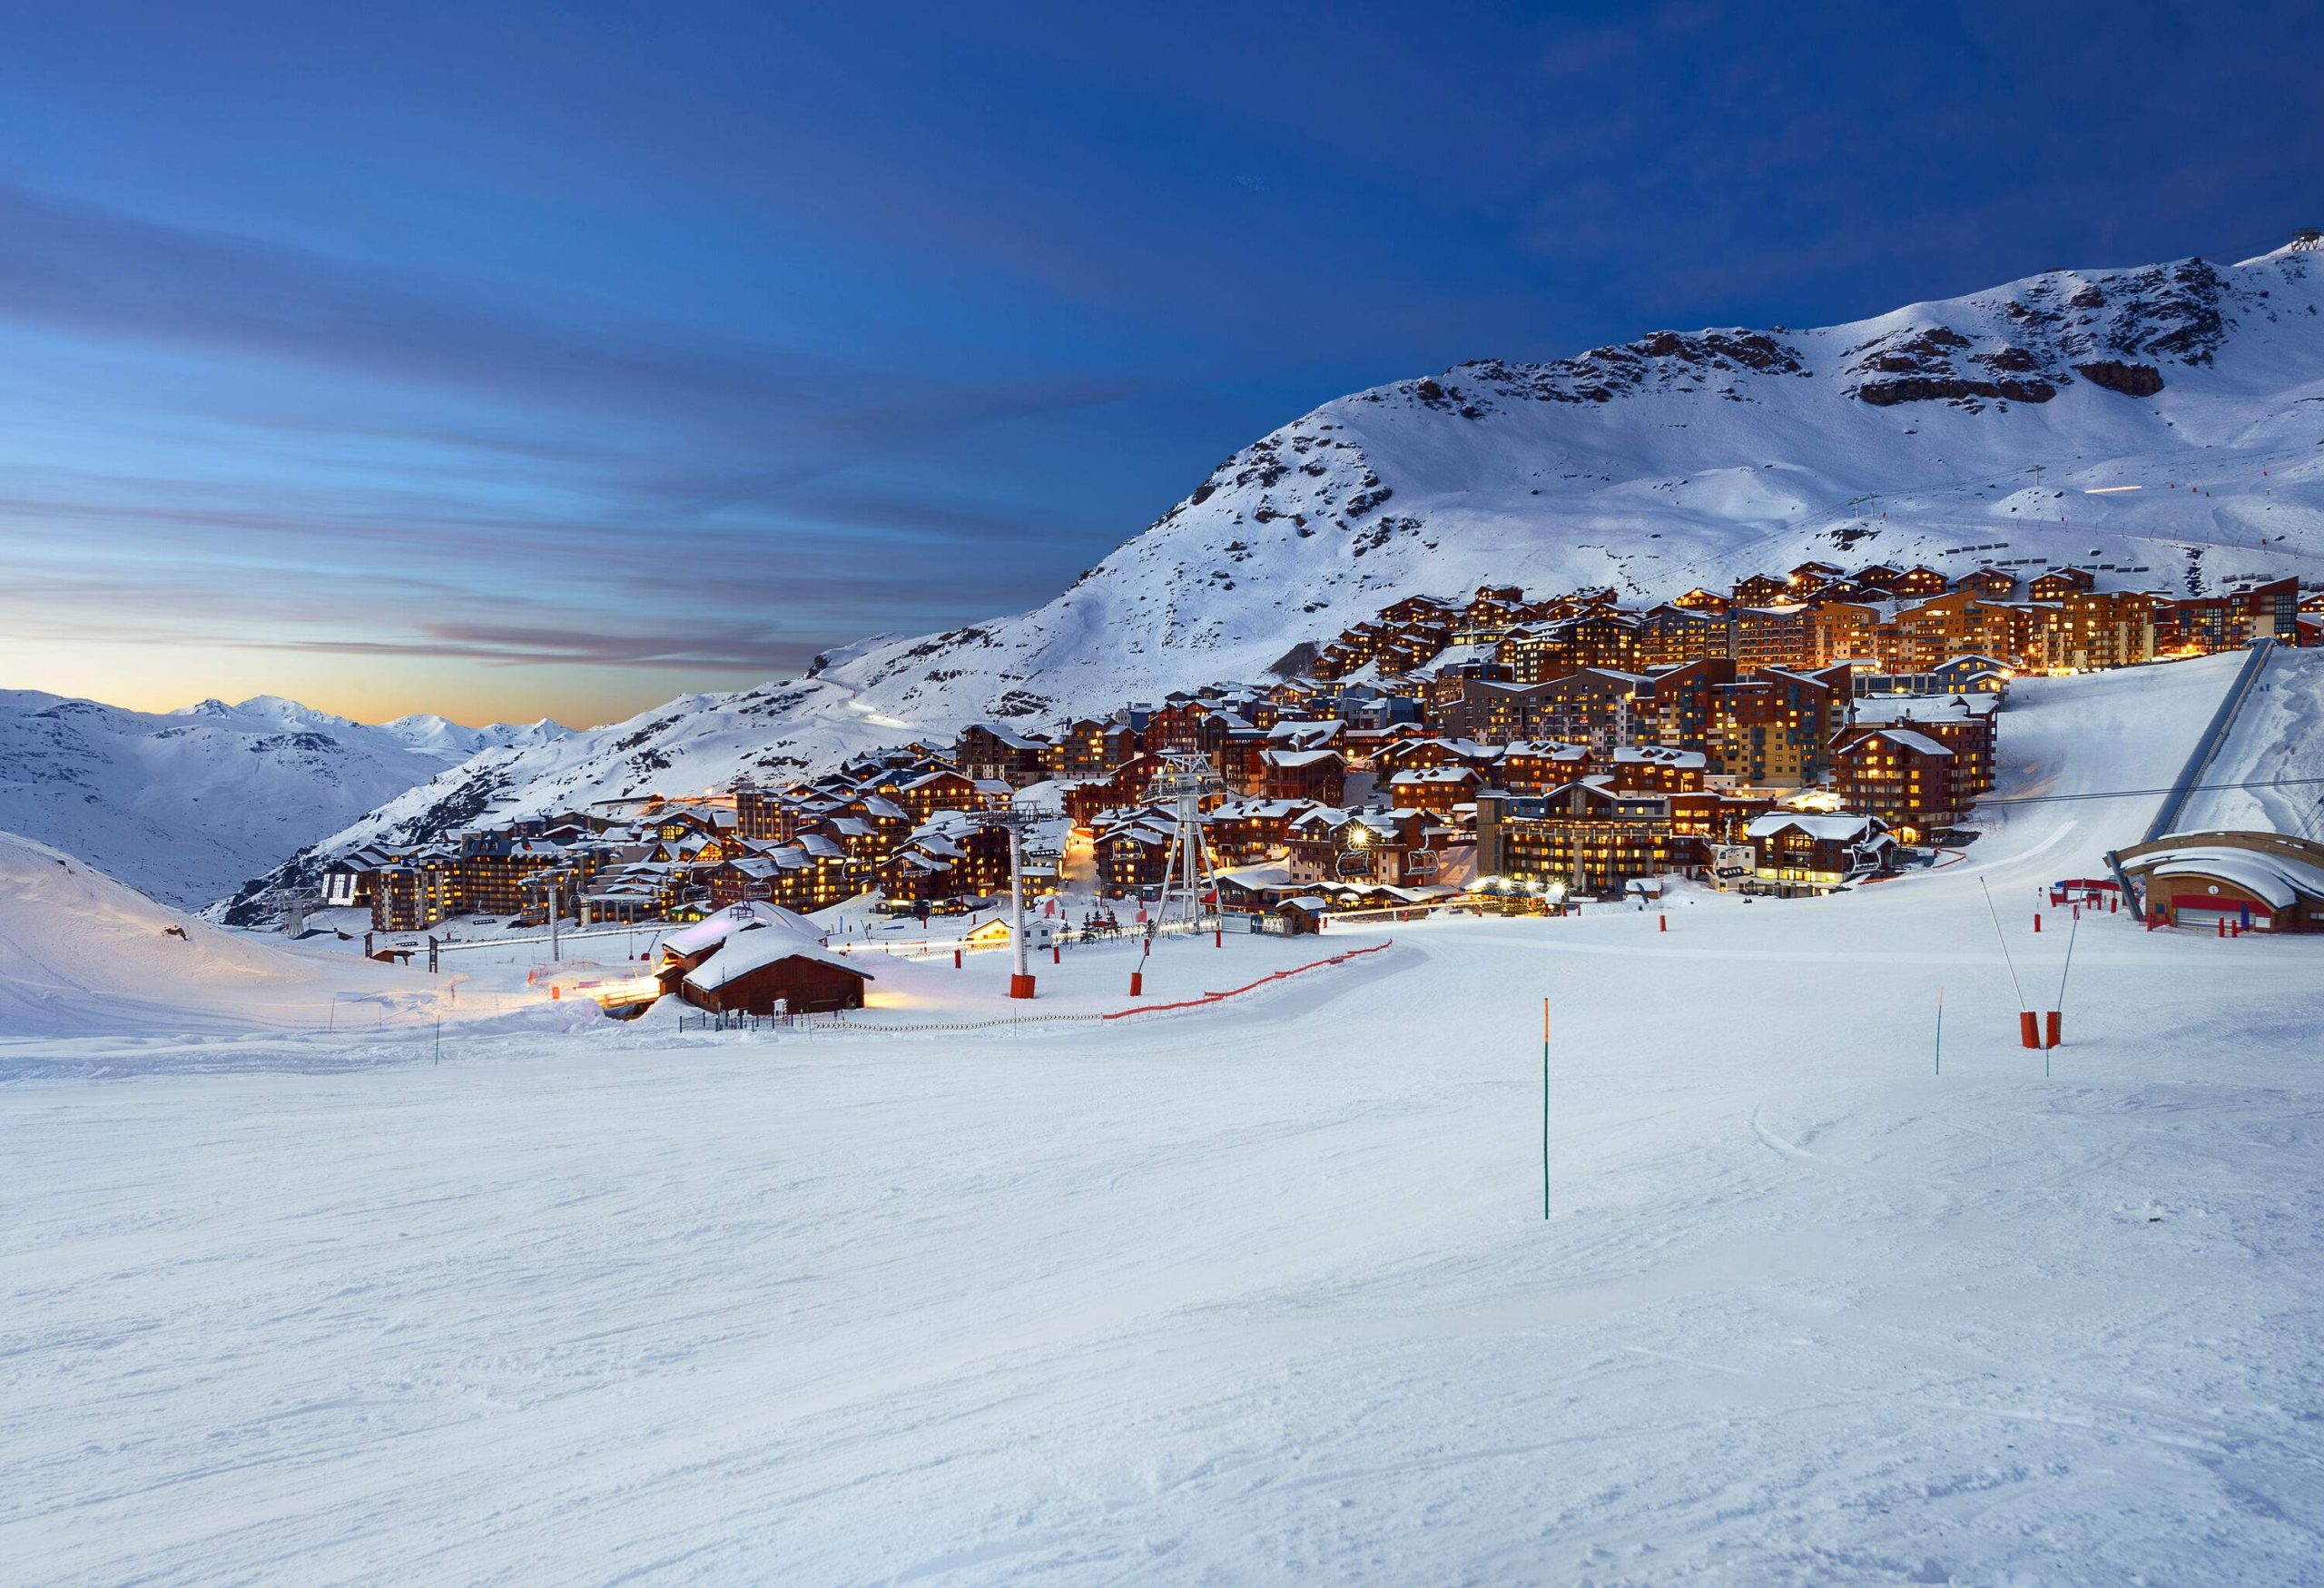 Magnificent chalets glowing at night near the snow-capped Alps.